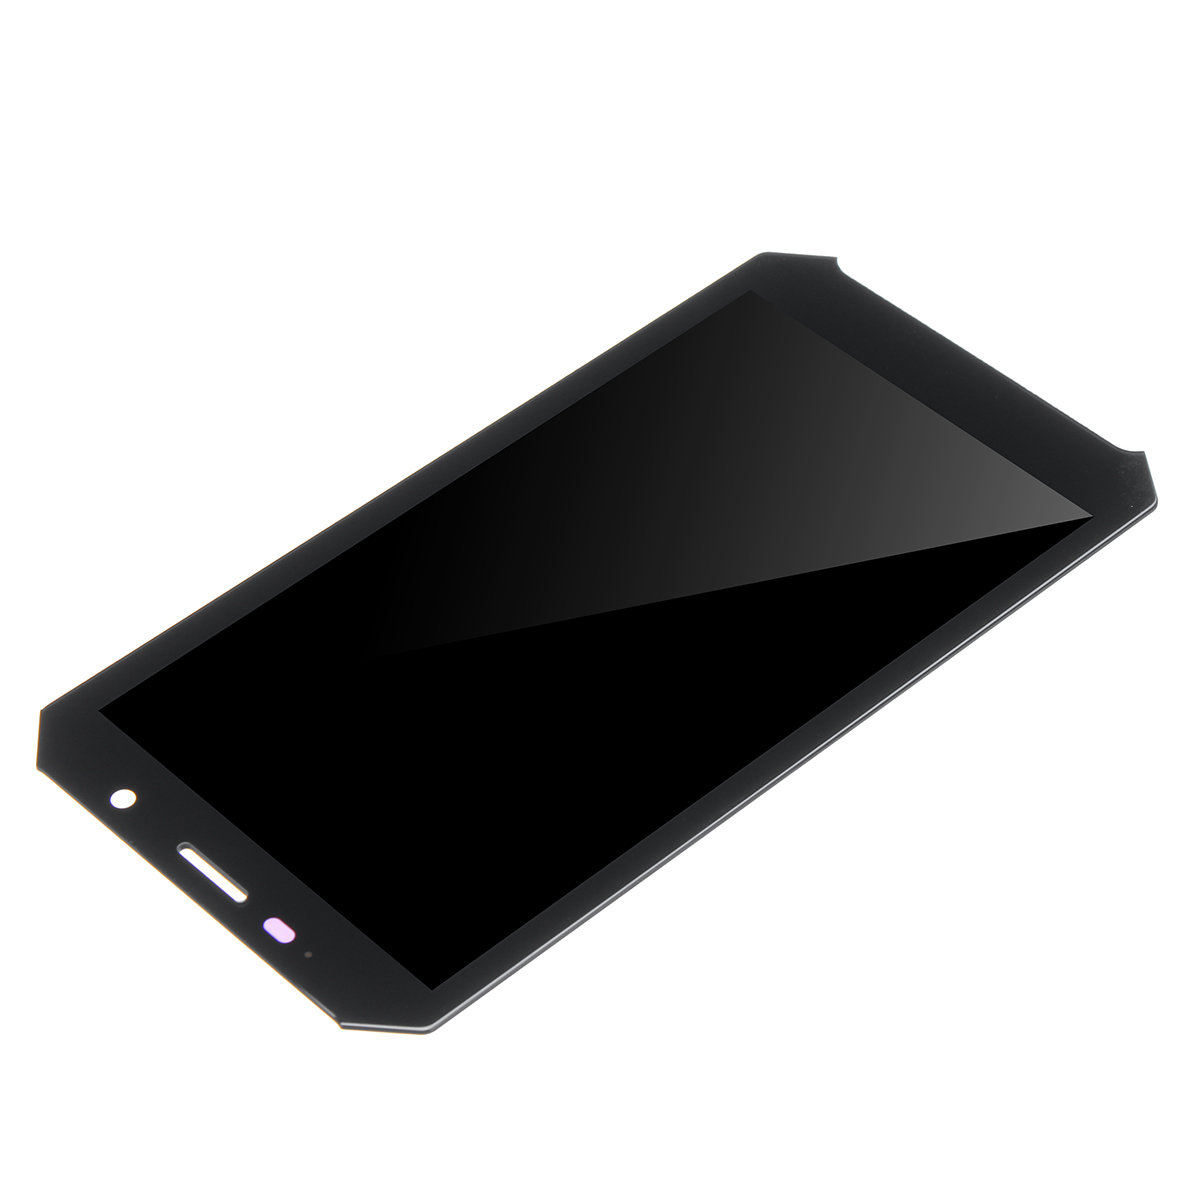 Full-Assembly-LCD-DisplayTouch-Screen-Digitizer-Replacement-With-Repair-Tools-For-DOOGEE-S60-1415752